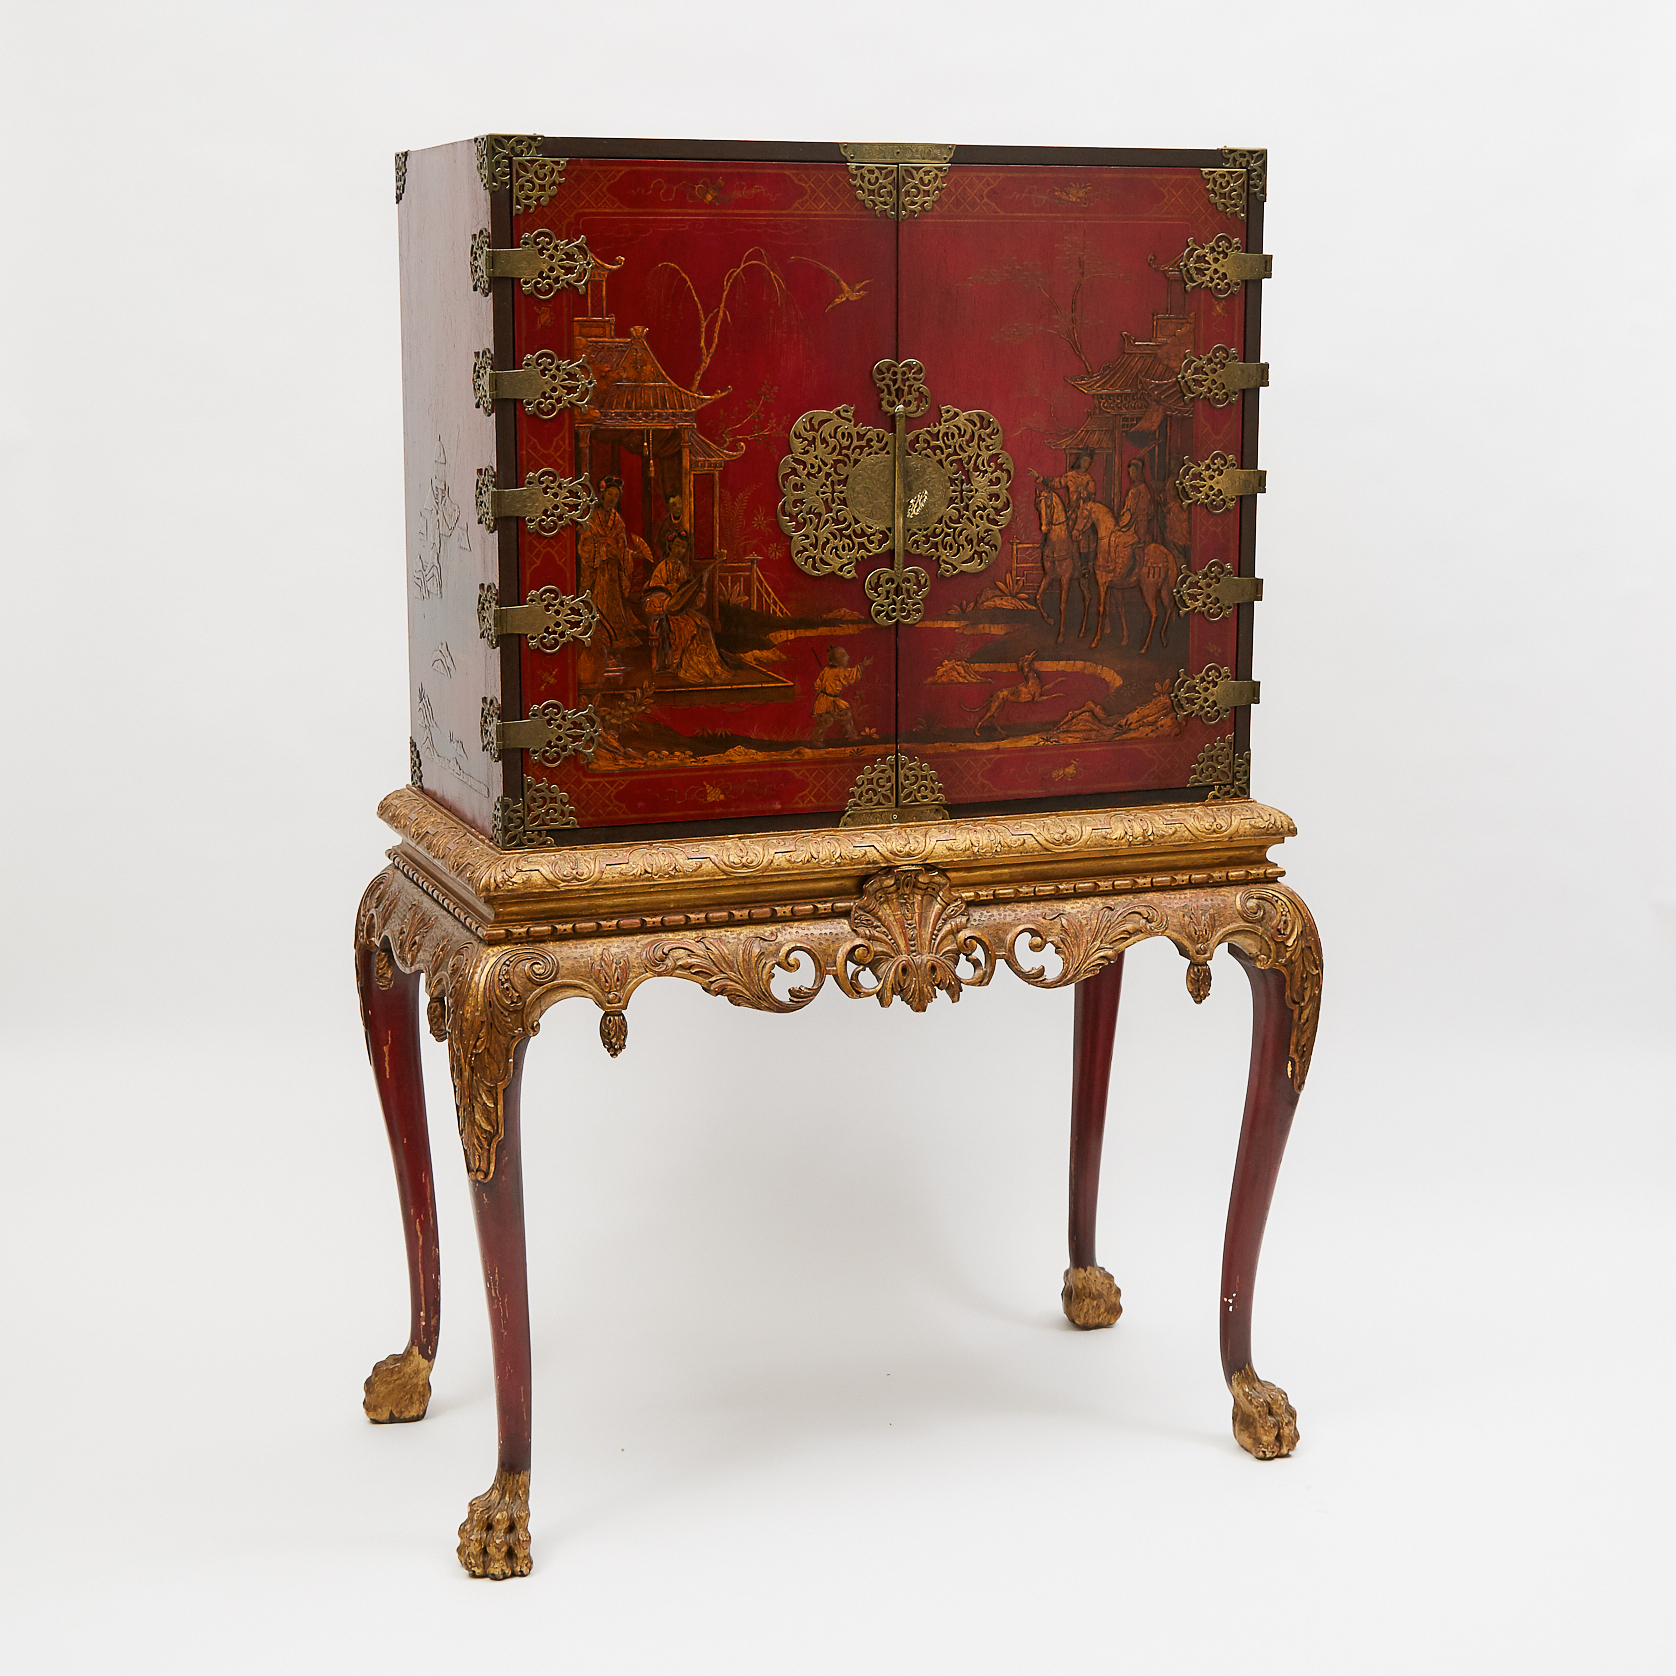 Chinoiserie Red Japanned Cabinet on Stand, early 20th century